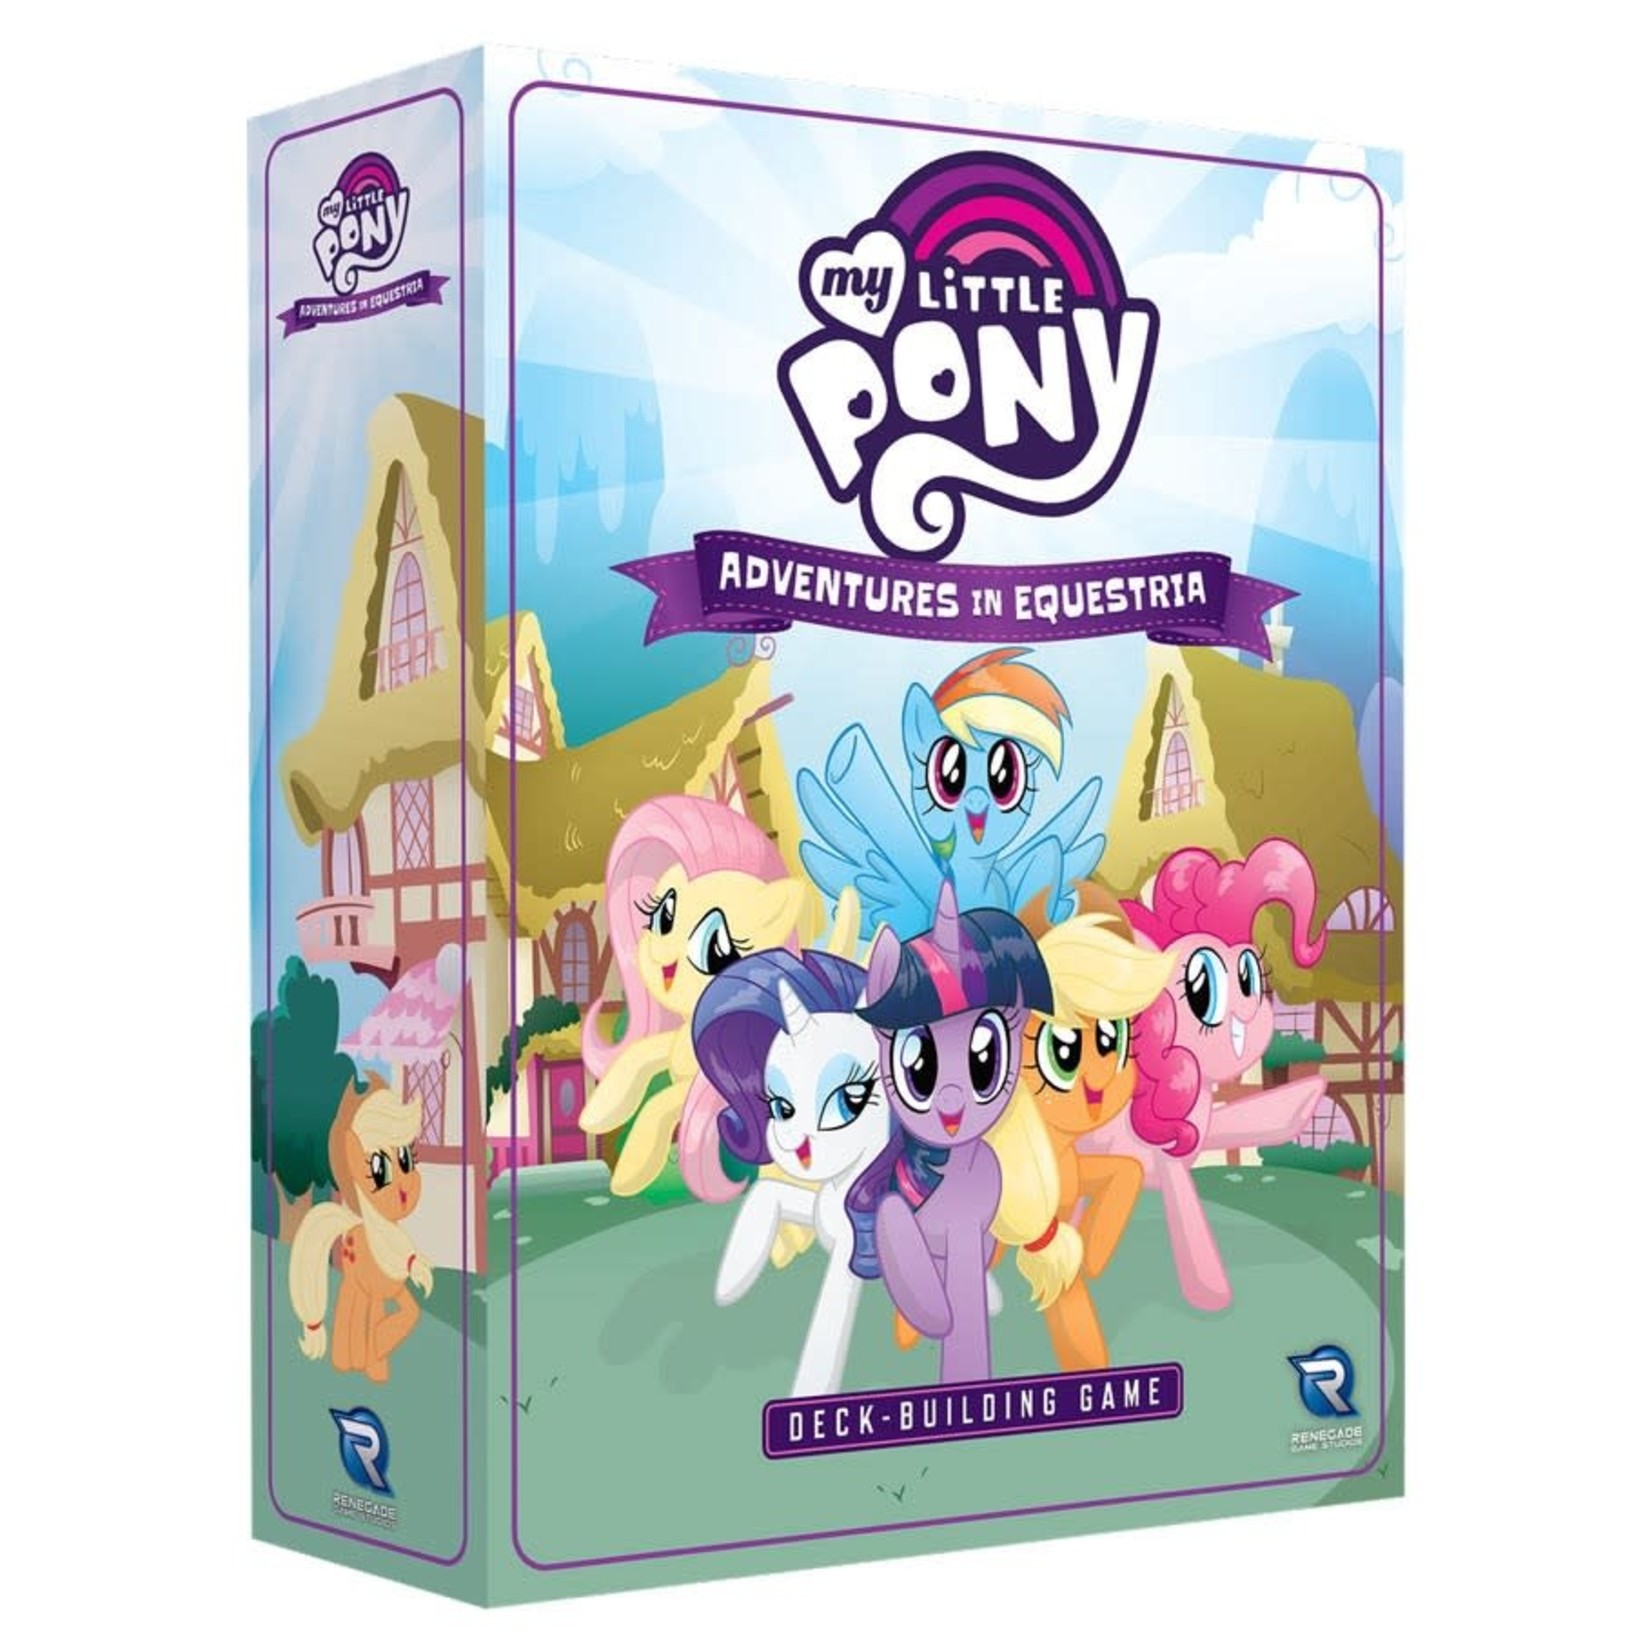 My Little Pony DBG: Adventures in Equestria Deck-Building Game